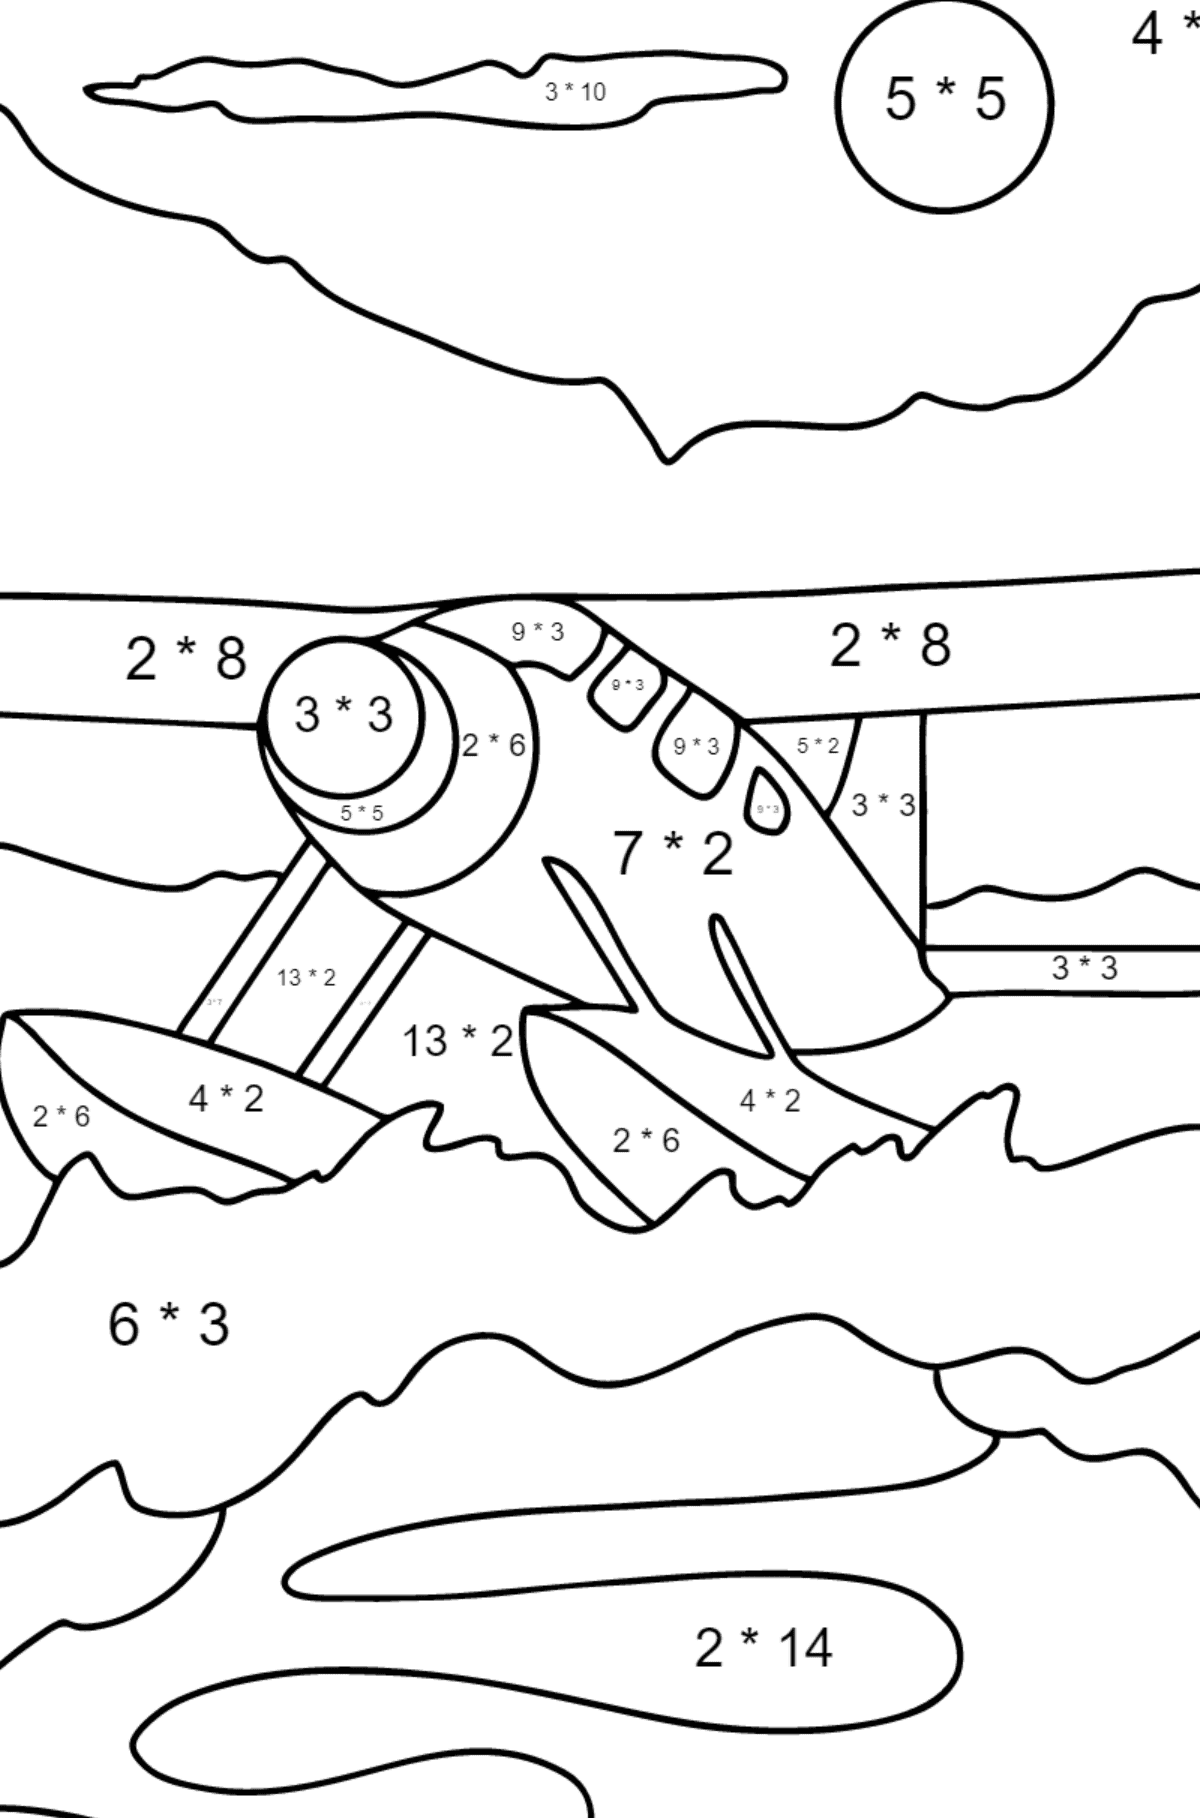 Coloring Page - A Hydroplane - Math Coloring - Multiplication for Kids